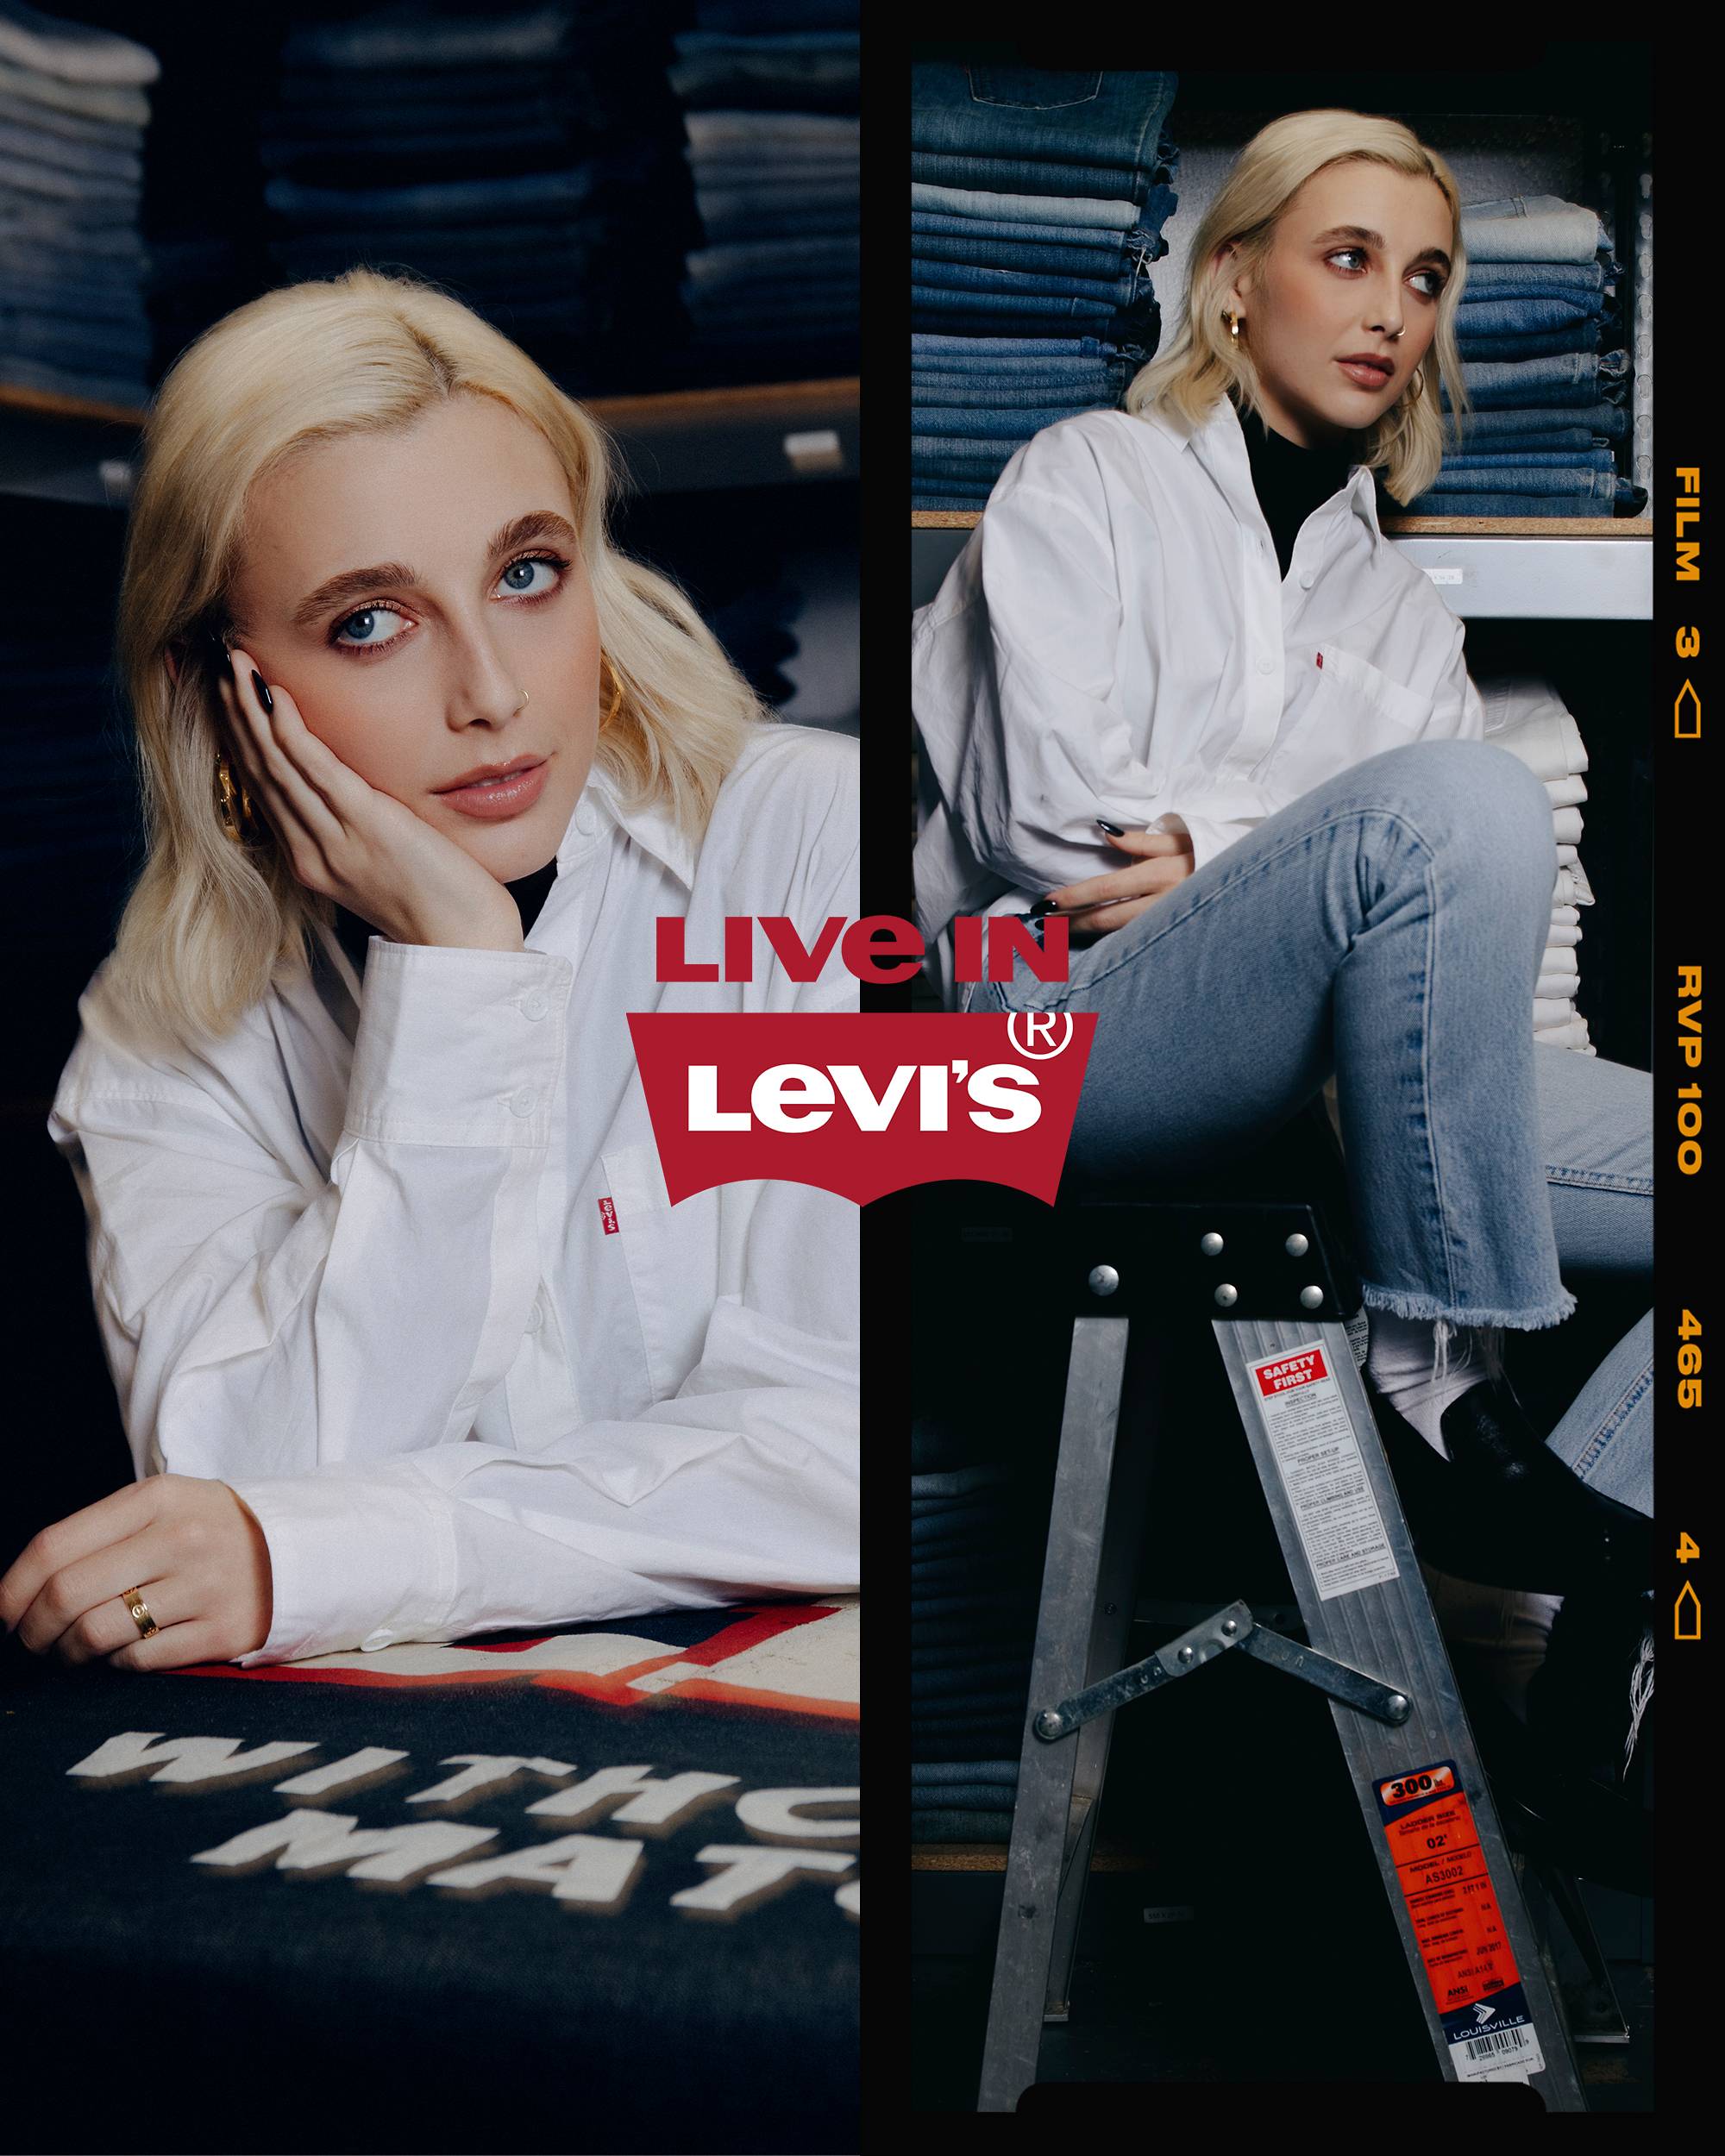 Vintage Levi's Jeans: Everything You Need to Know